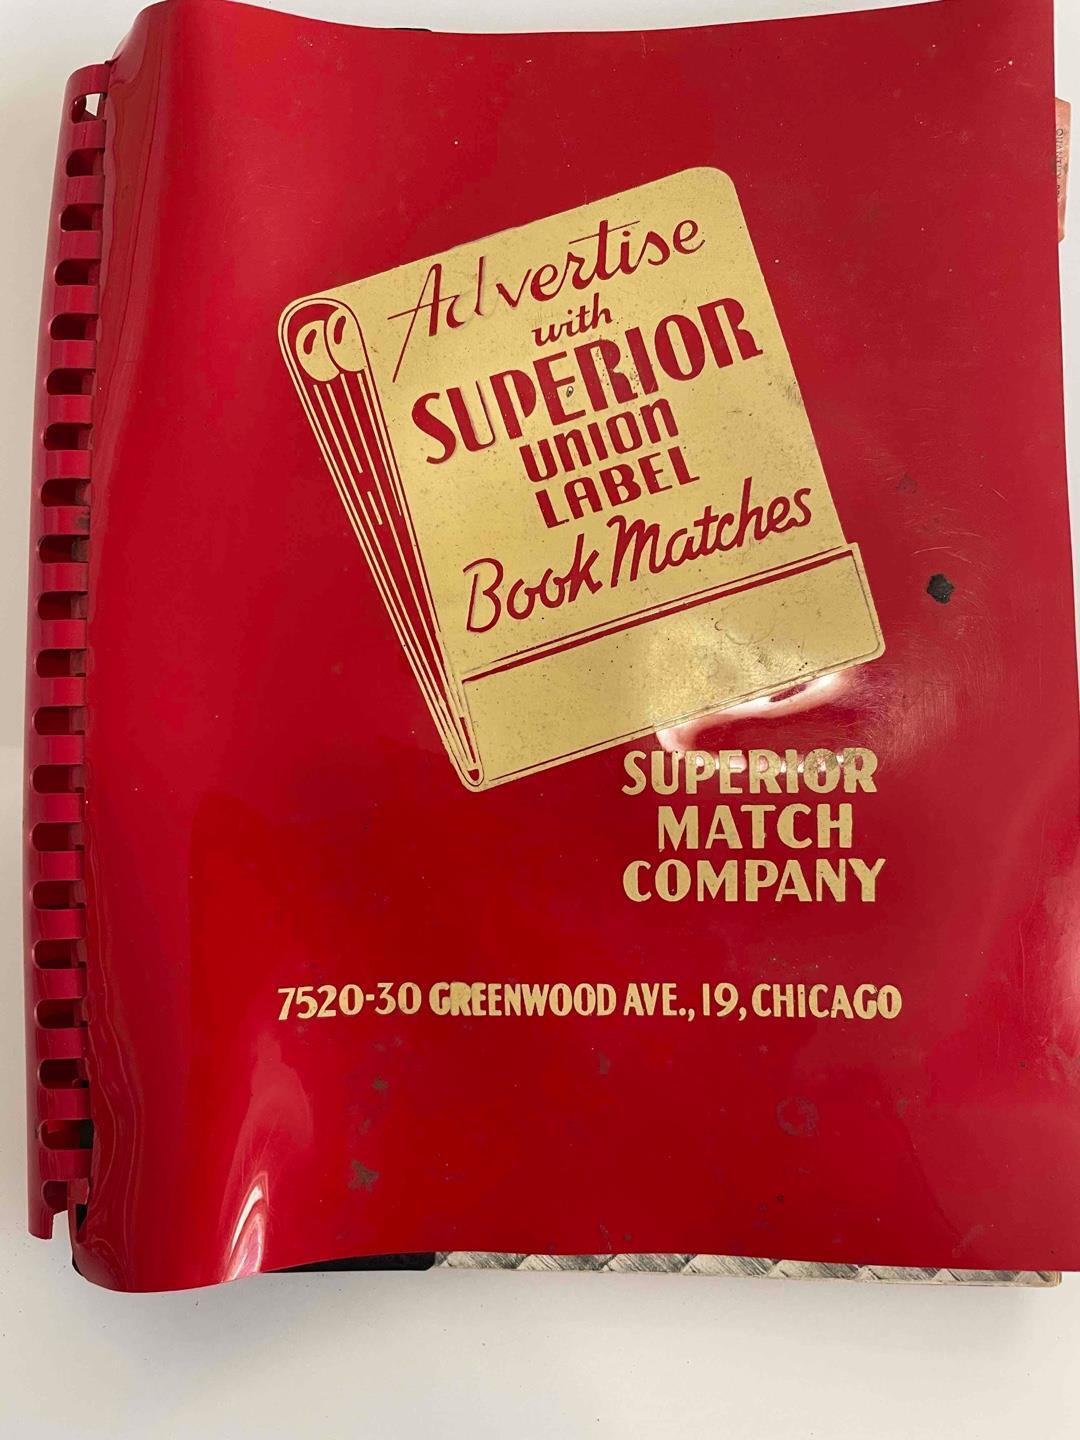 VINTAGE SUPERIOR UNION LABEL BOOK MATCHES 180 PAGE SALESMANS SAMPLE ADVERTISING